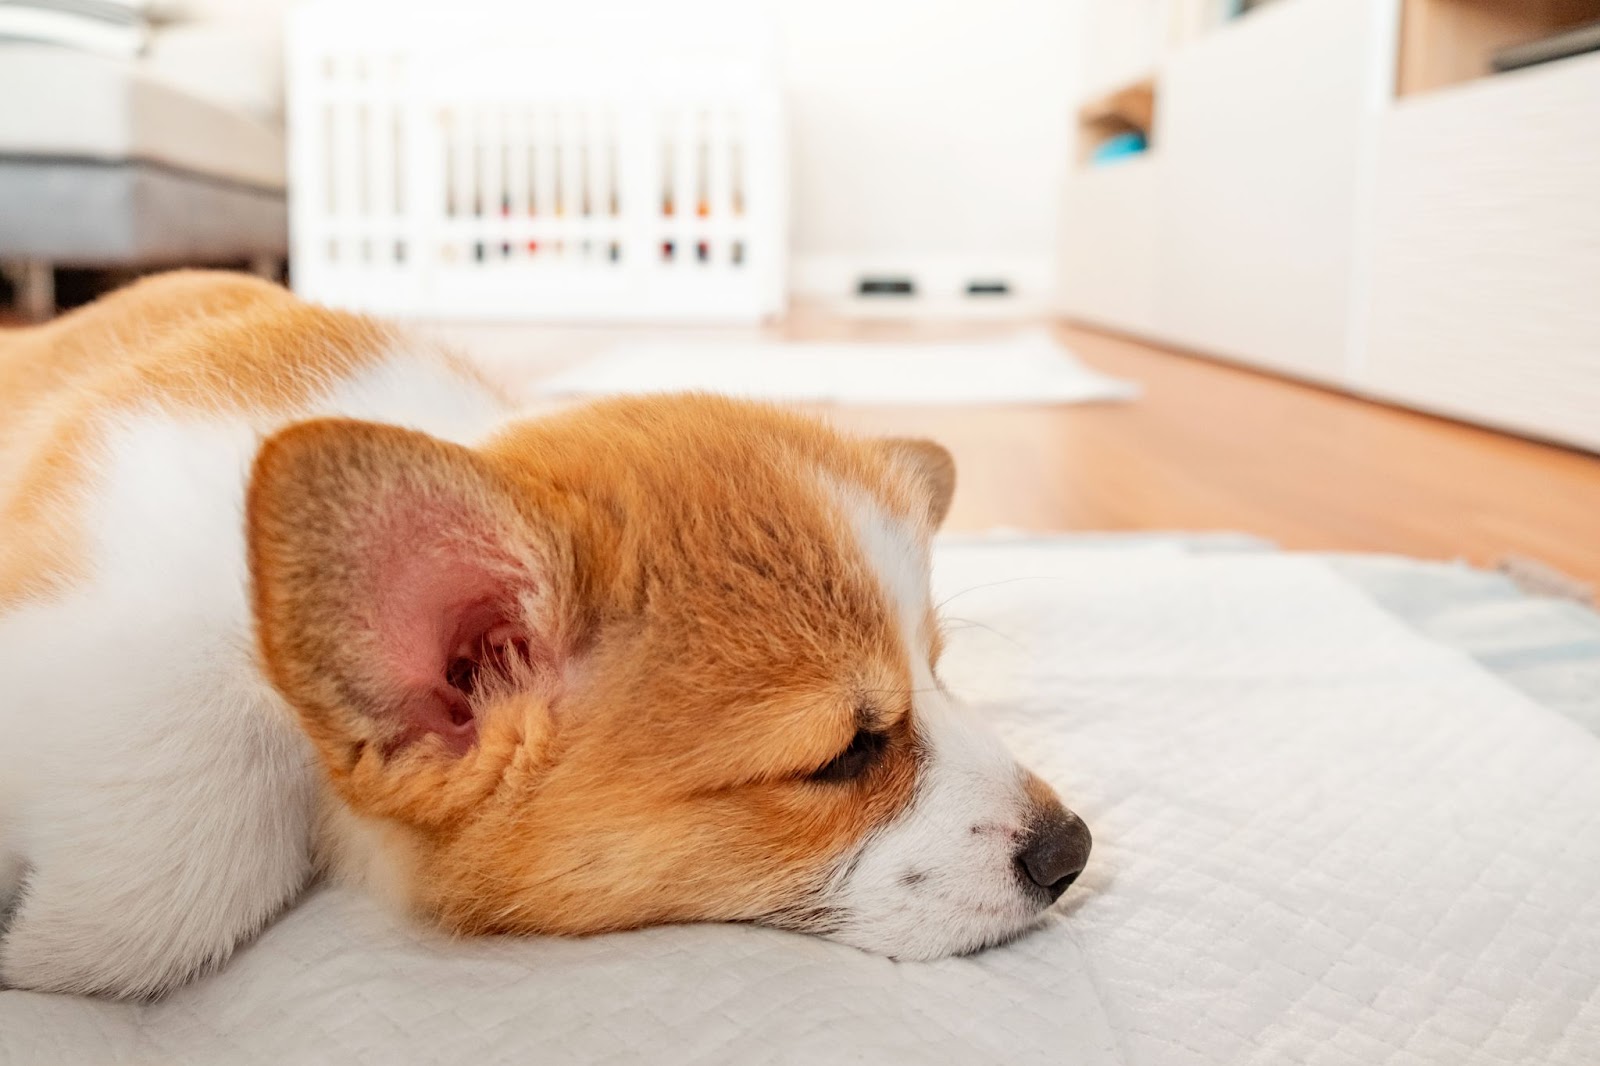 how to train a puppy that won't go potty during the night